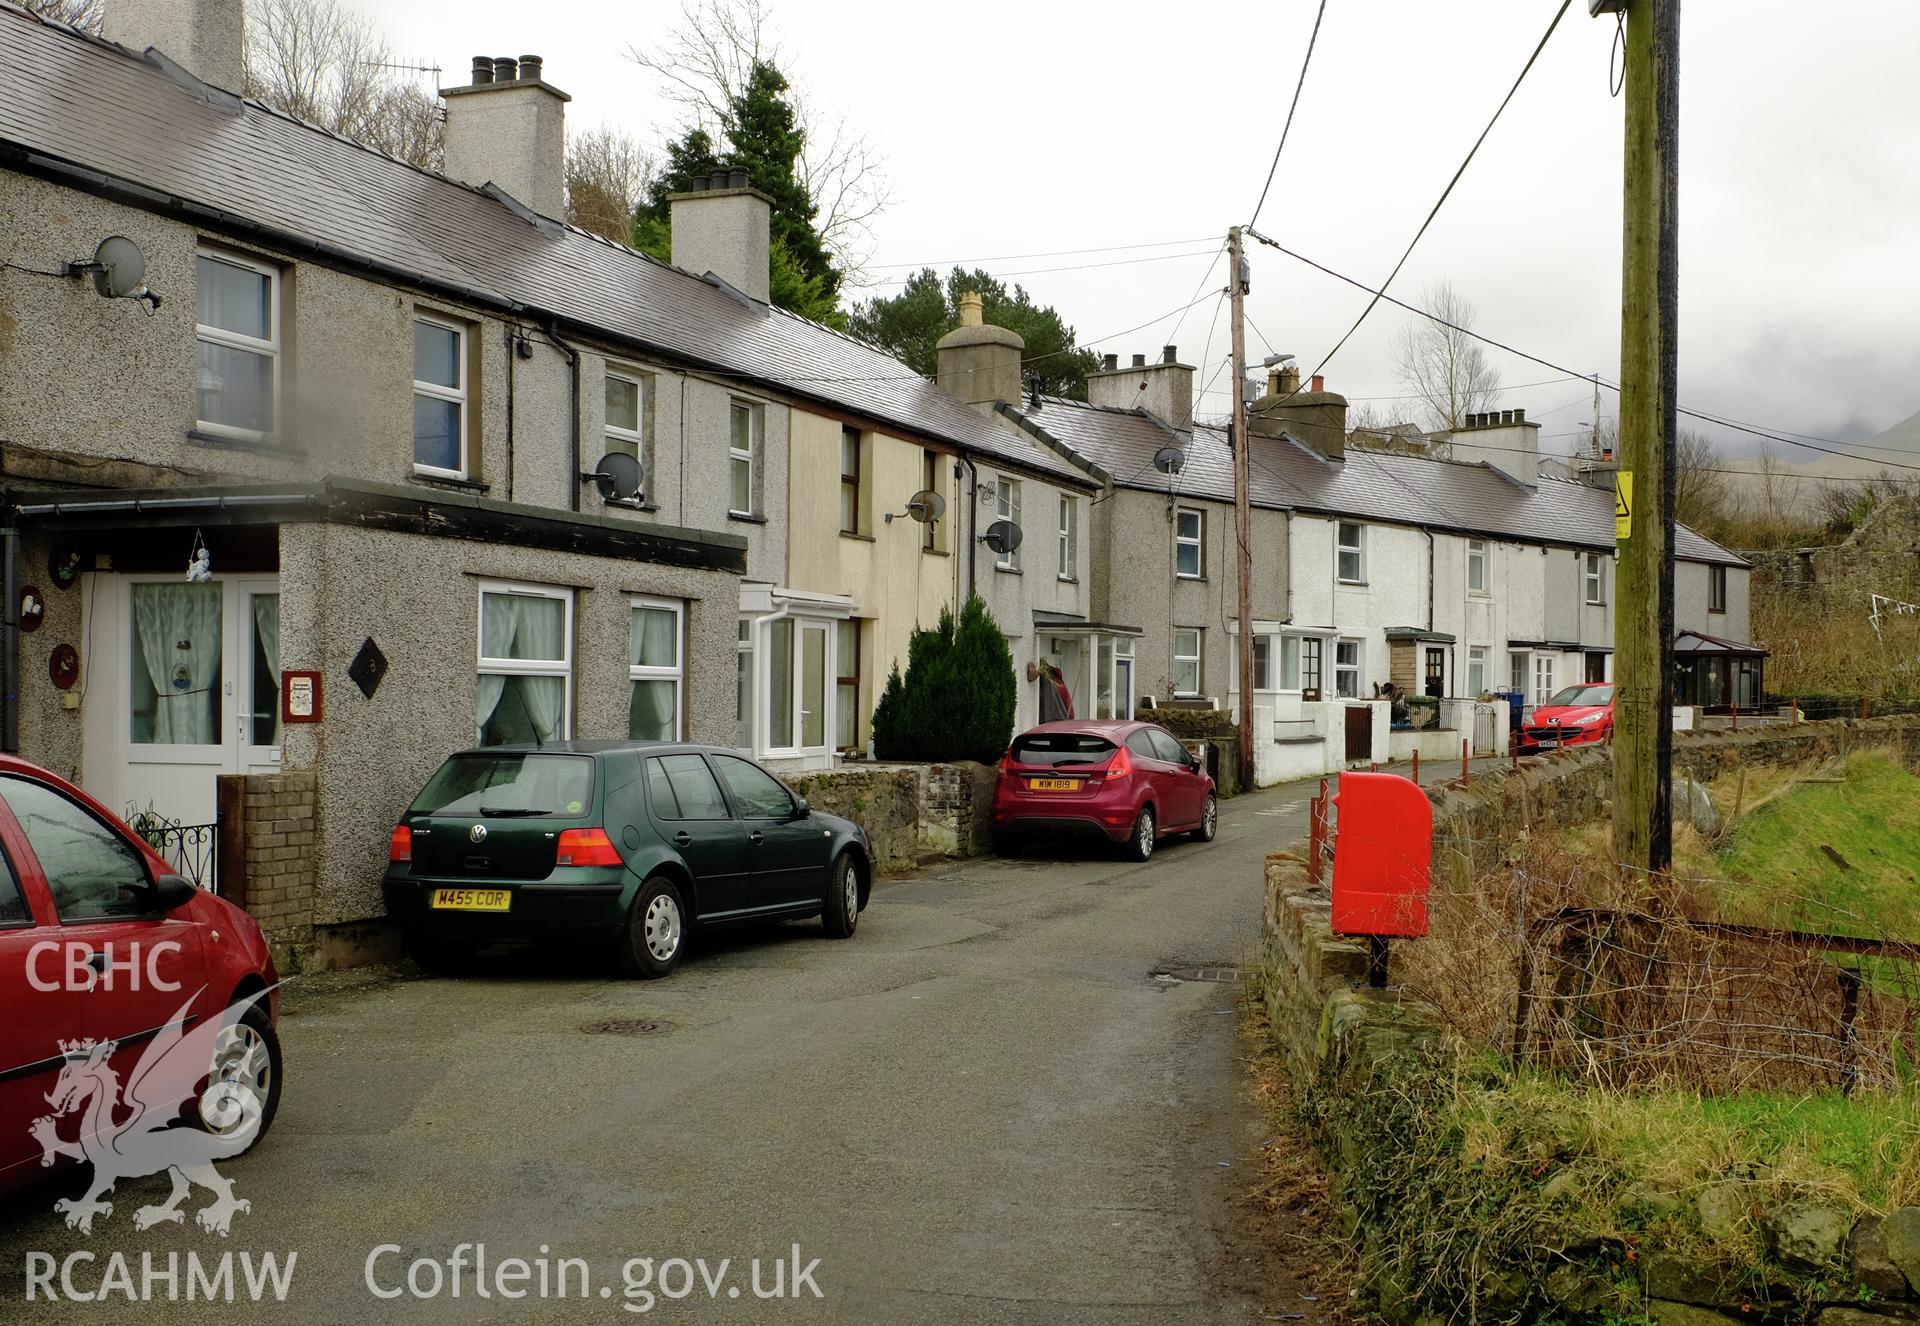 Colour photograph showing view looking south east at Bontuchaf, Bethesda, produced by Richard Hayman 16th February 2017